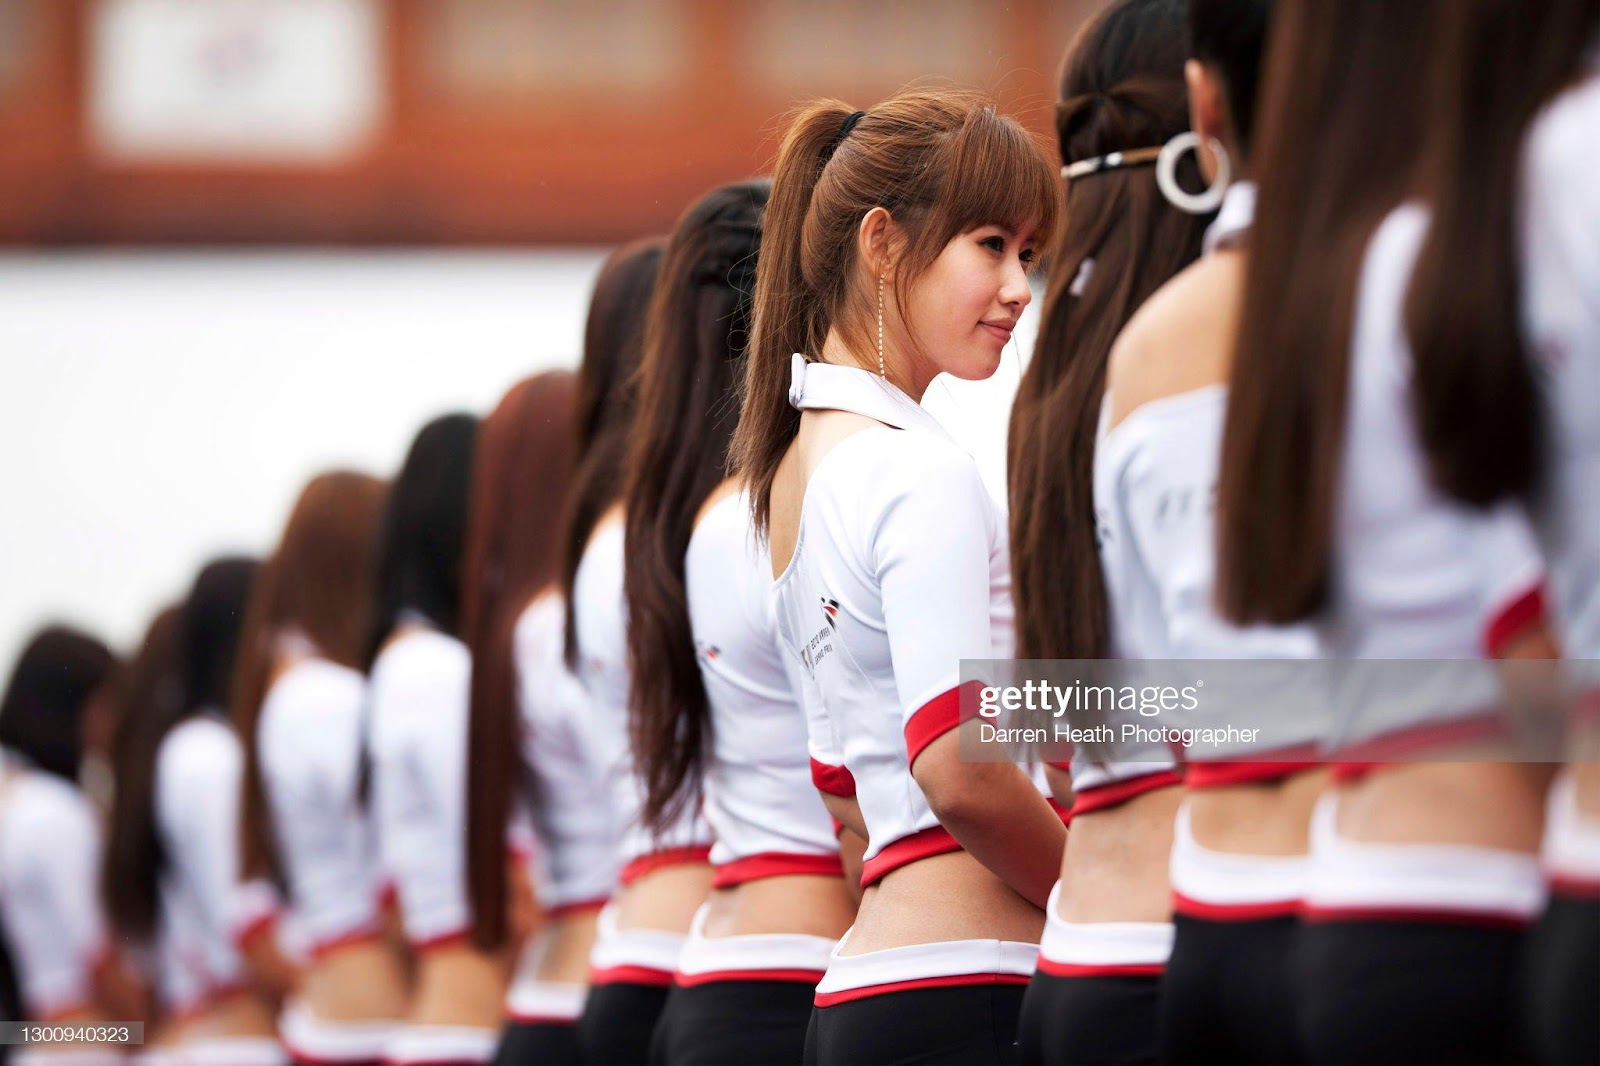 D:\Documenti\posts\posts\Women and motorsport\foto\Getty e altre\Korea\formula-one-grid-girls-line-up-at-the-2010-korean-grand-prix-yeongam-picture-id1300940323.jpg